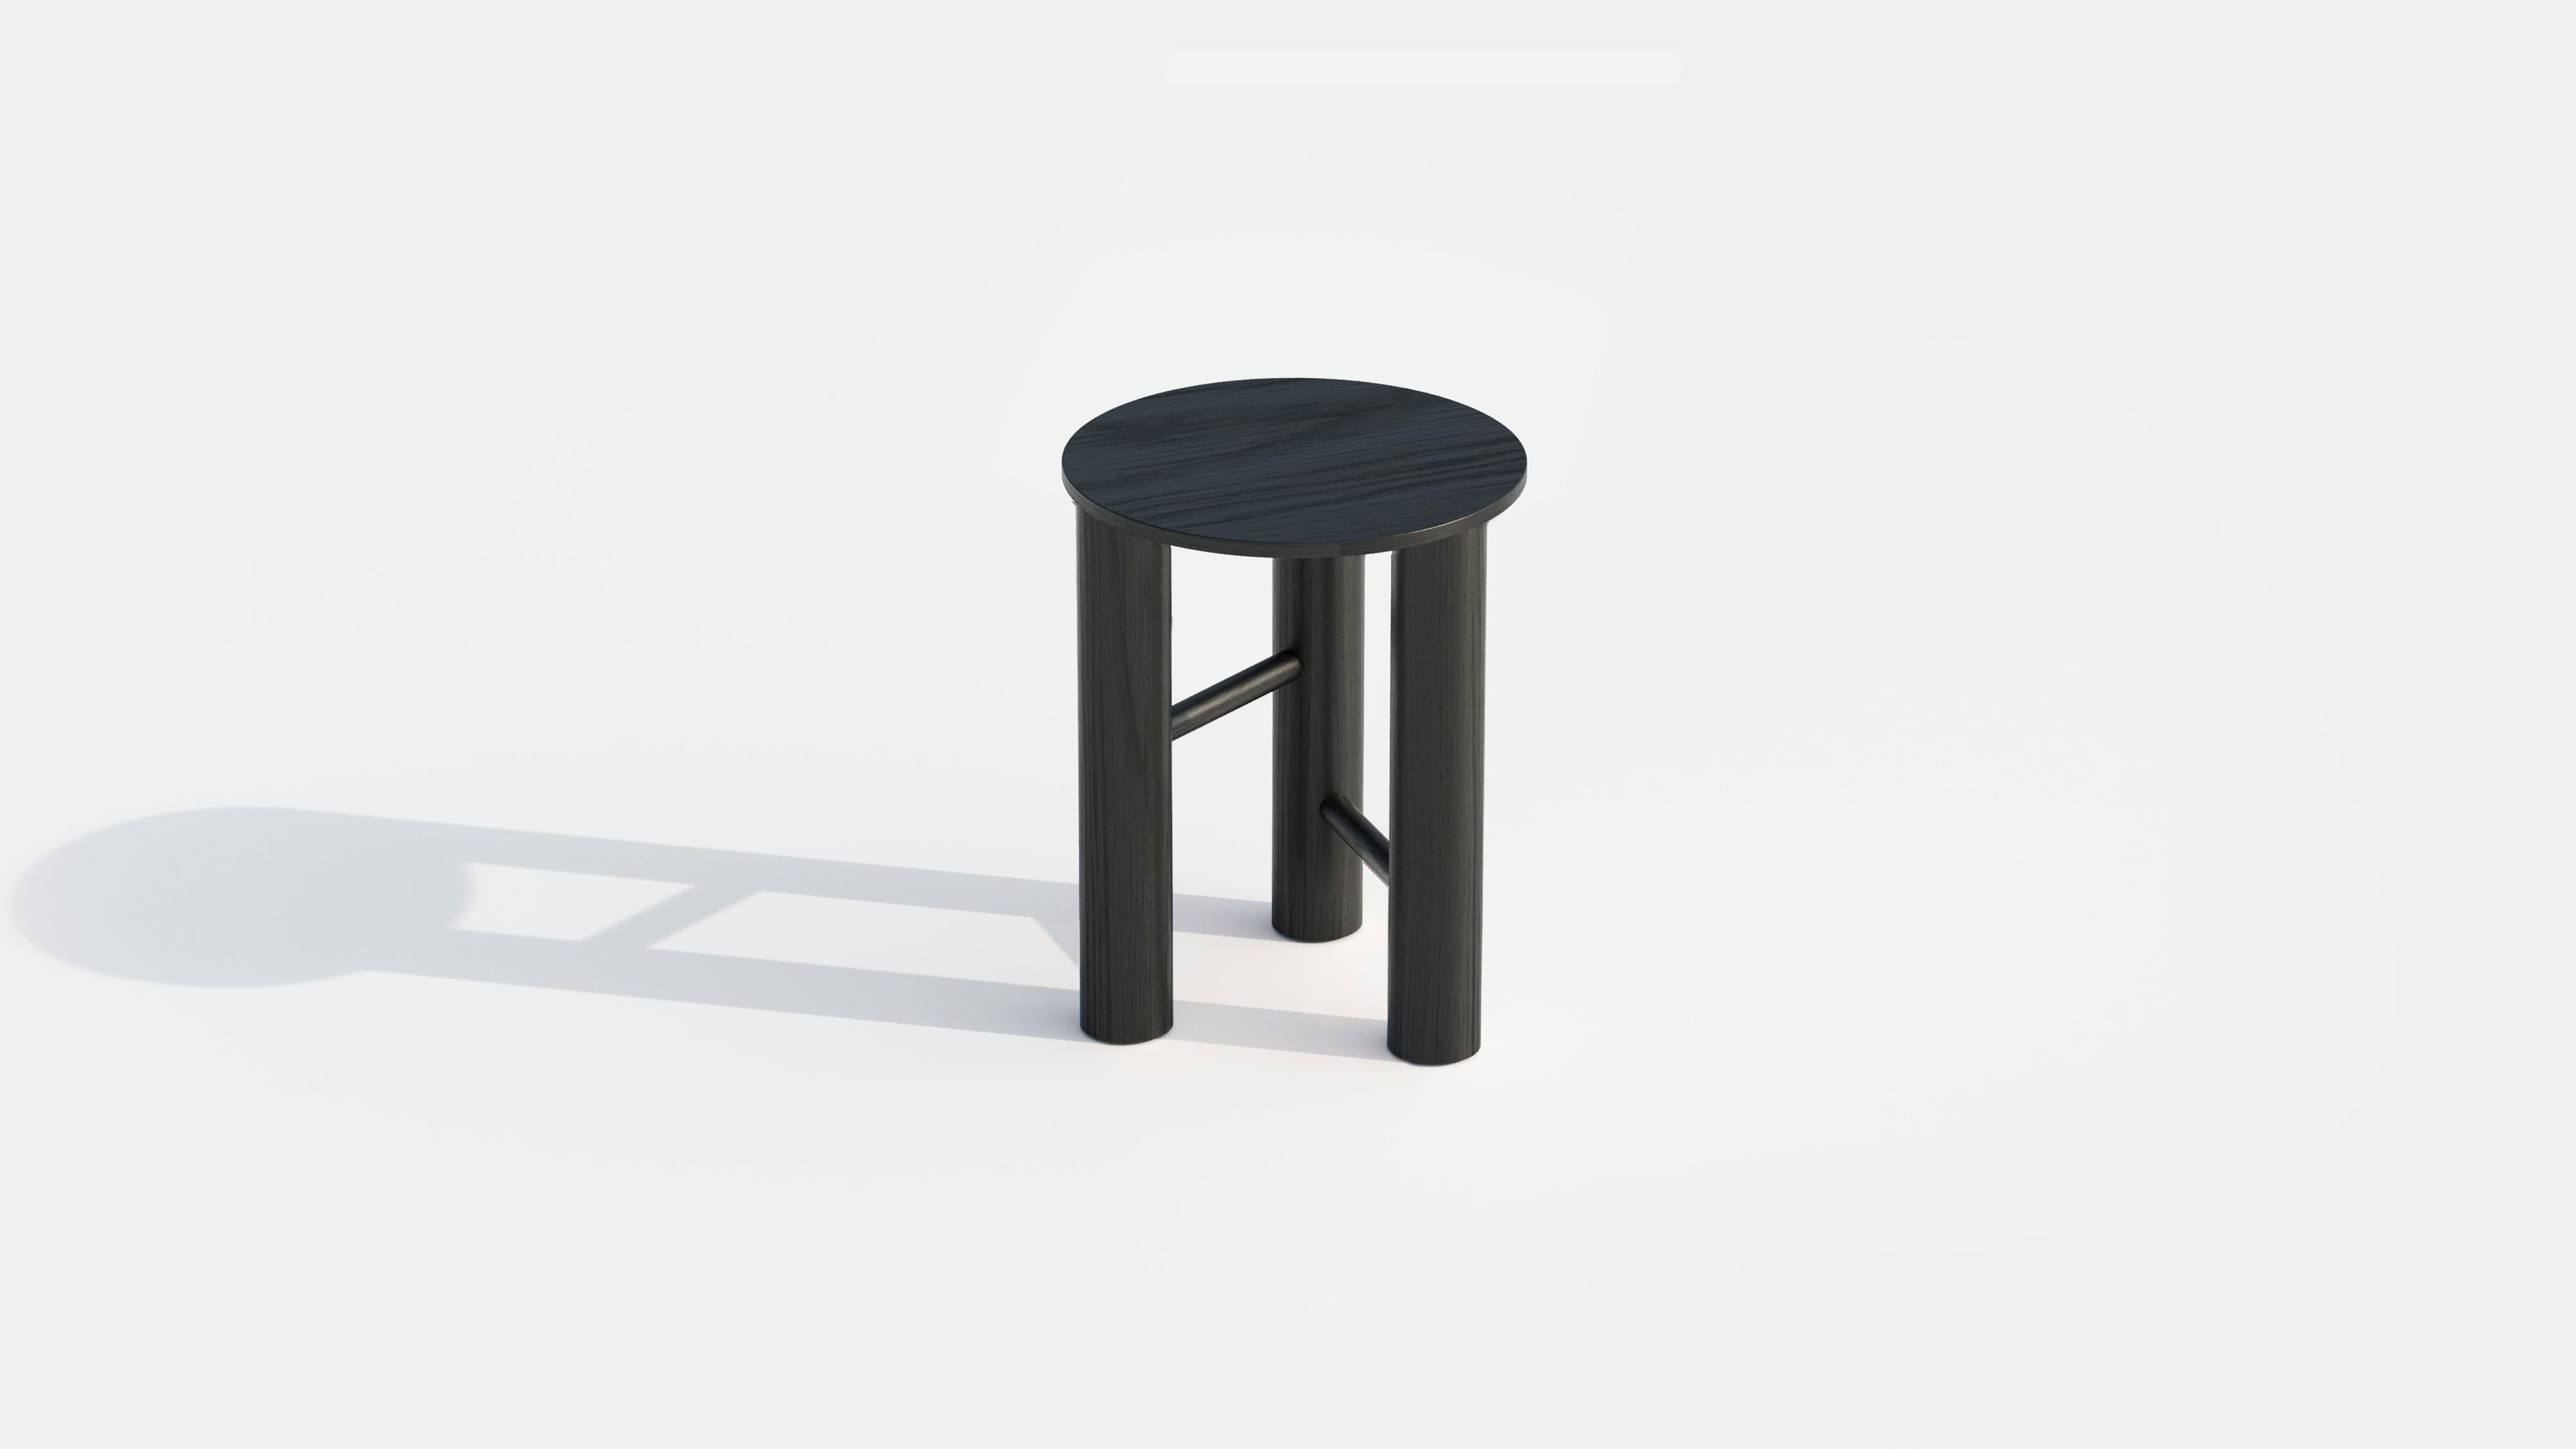 The LAD stool is crafted entirely from solid red oak covered with a clear matte lacquer. This unique stool captures the essence of local craftsmanship in Quebec. LAD is a versatile masterpiece with three legs, available in two heights - 2164 inches